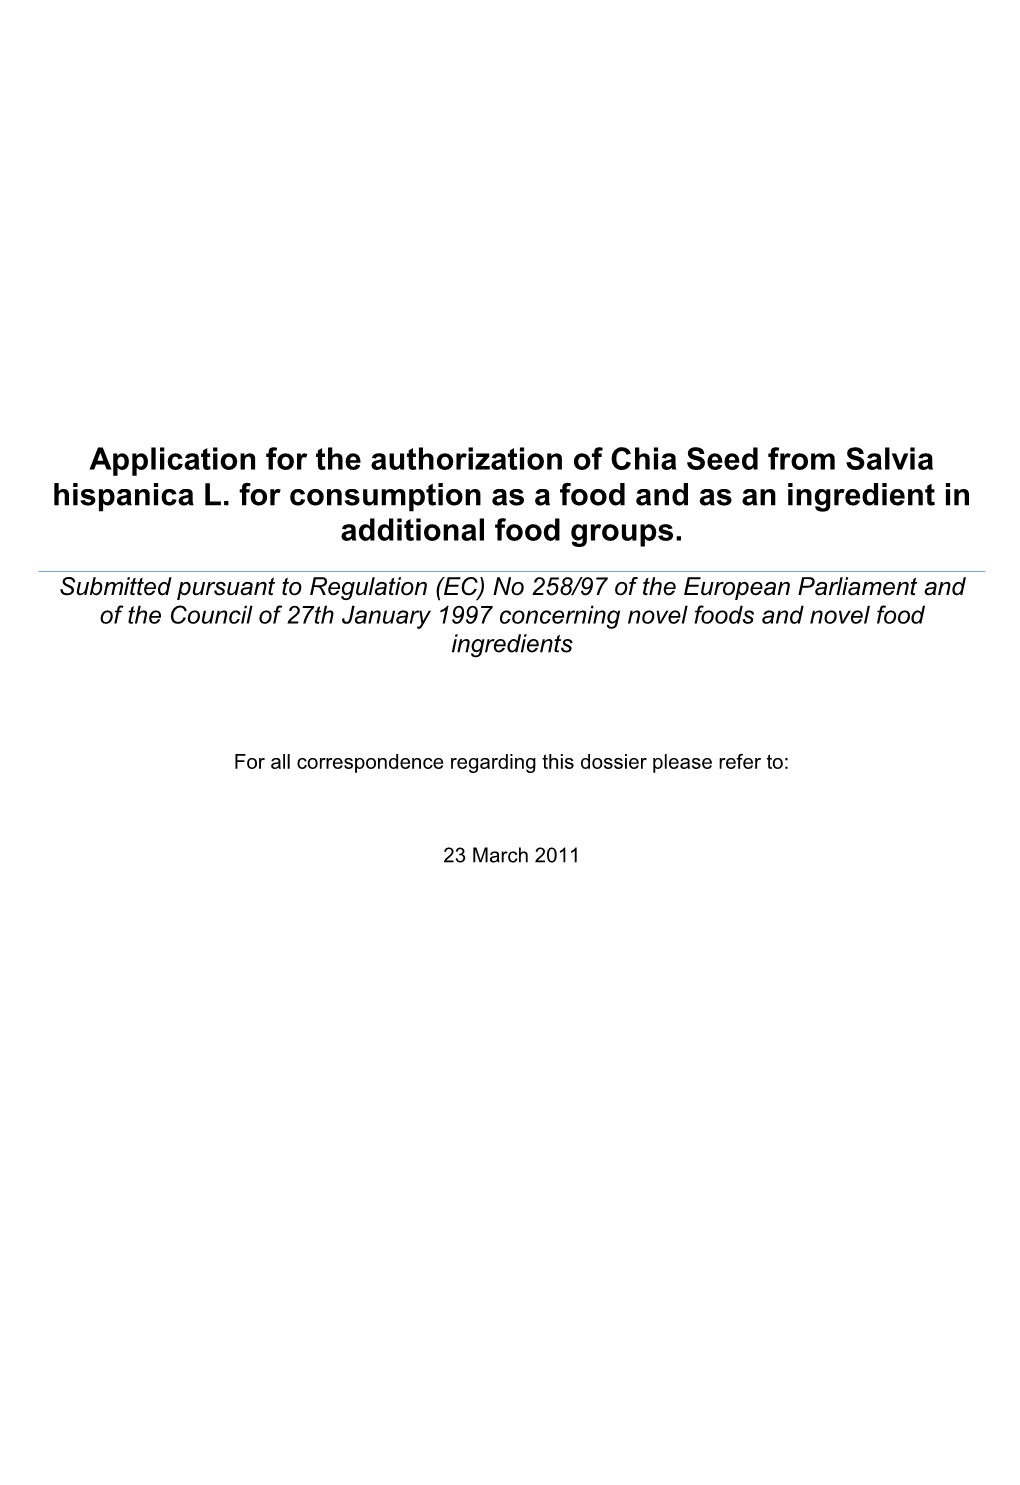 Application for the Authorization of Chia Seed from Salvia Hispanica L. for Consumption As a Food and As an Ingredient in Additional Food Groups